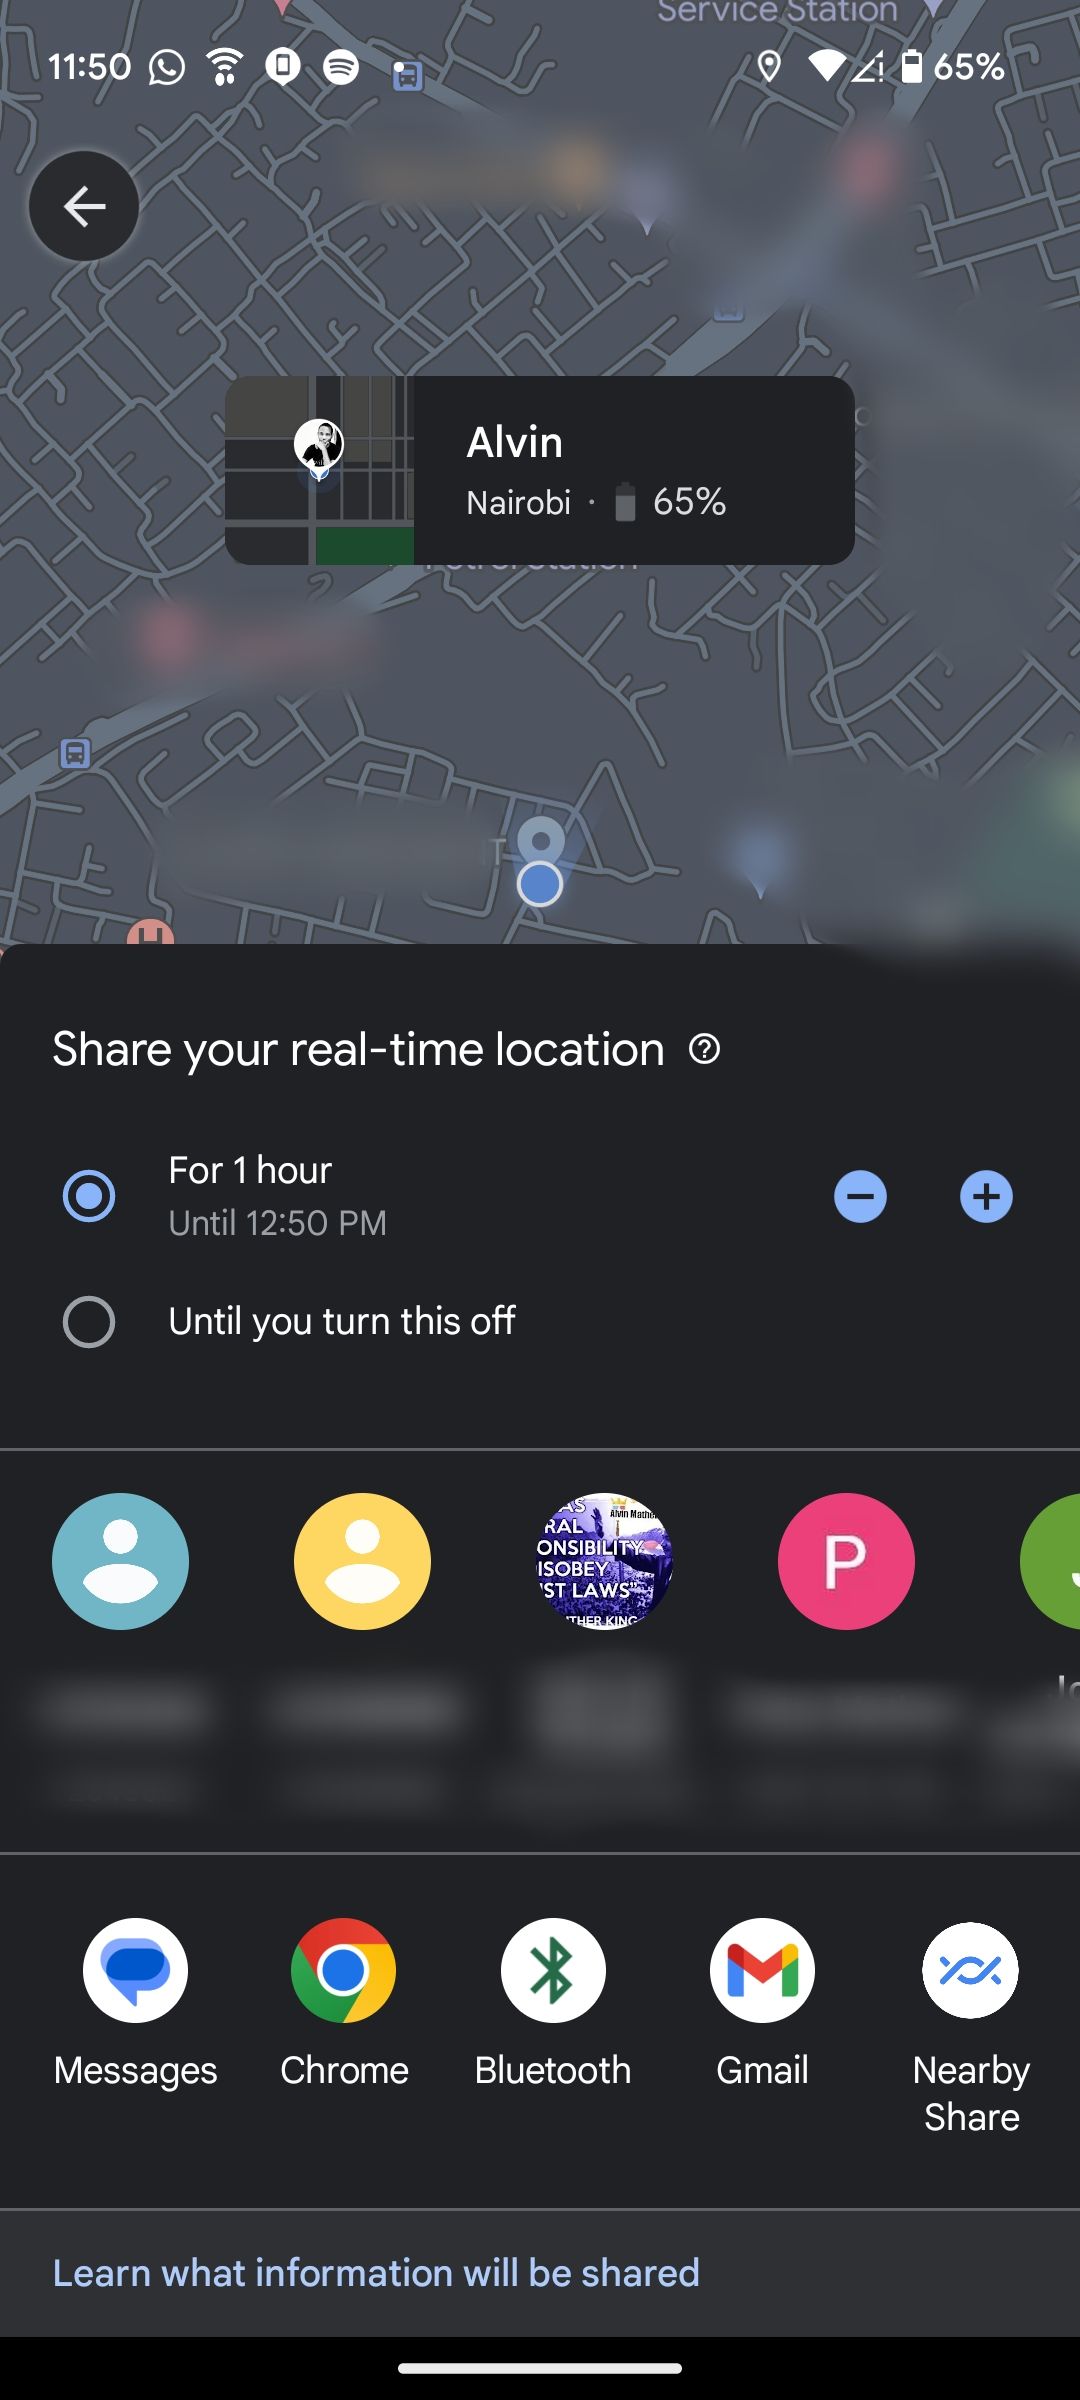 Sharing current location in Google Maps